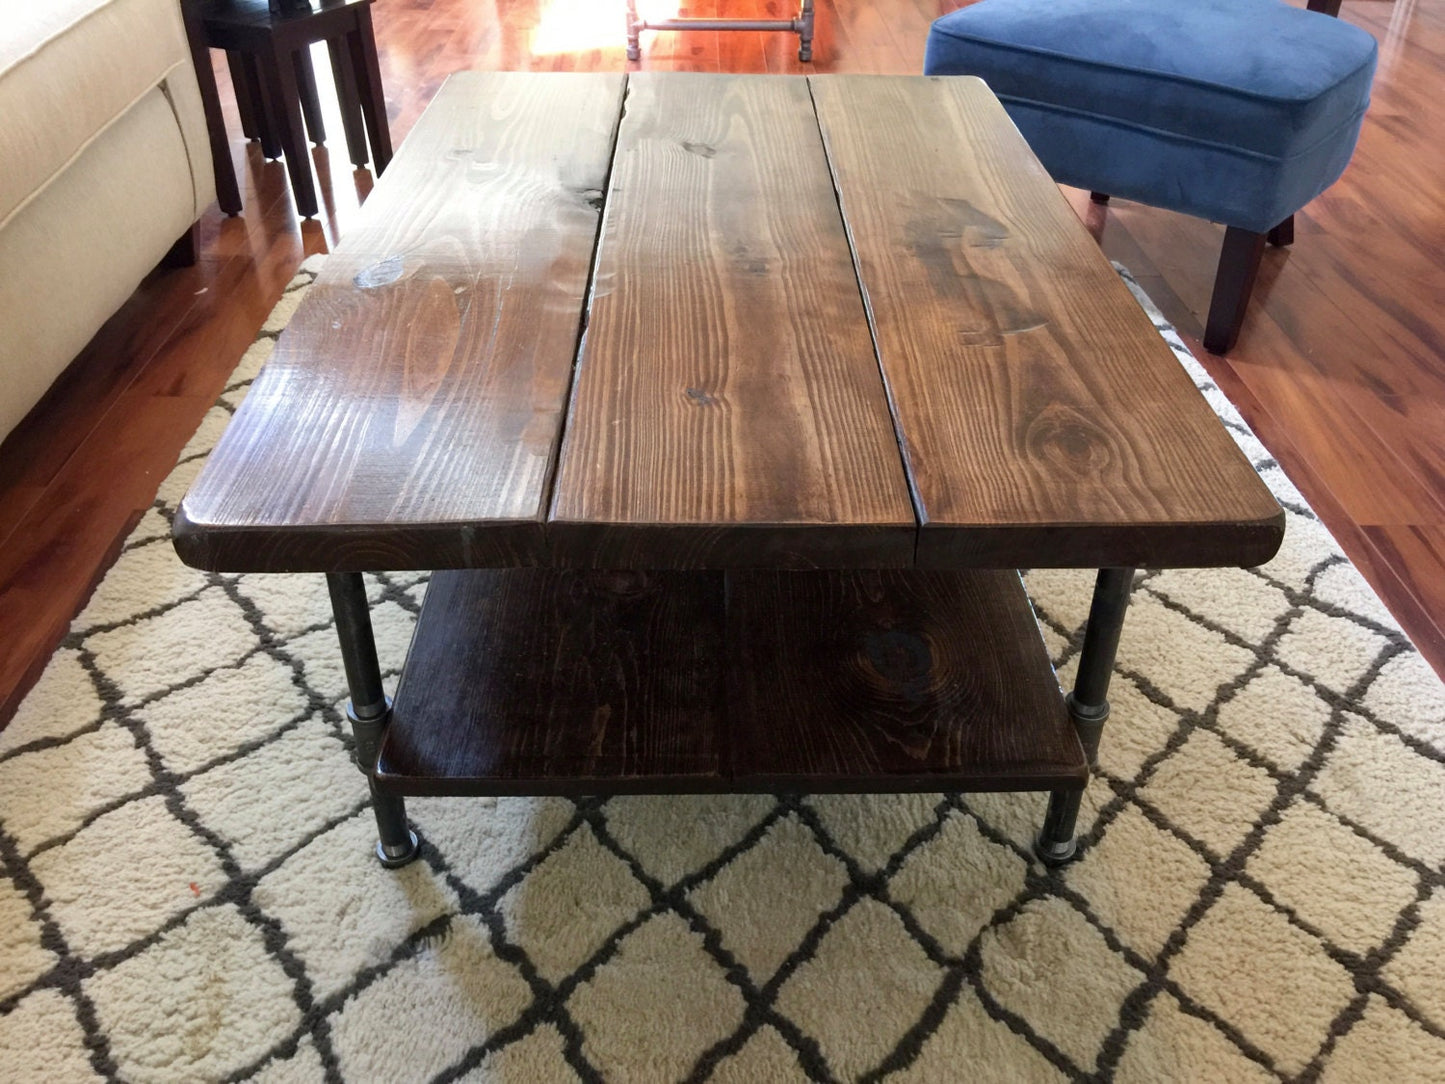 Steel and Pine Wood Coffee Table with Shelf Style 2